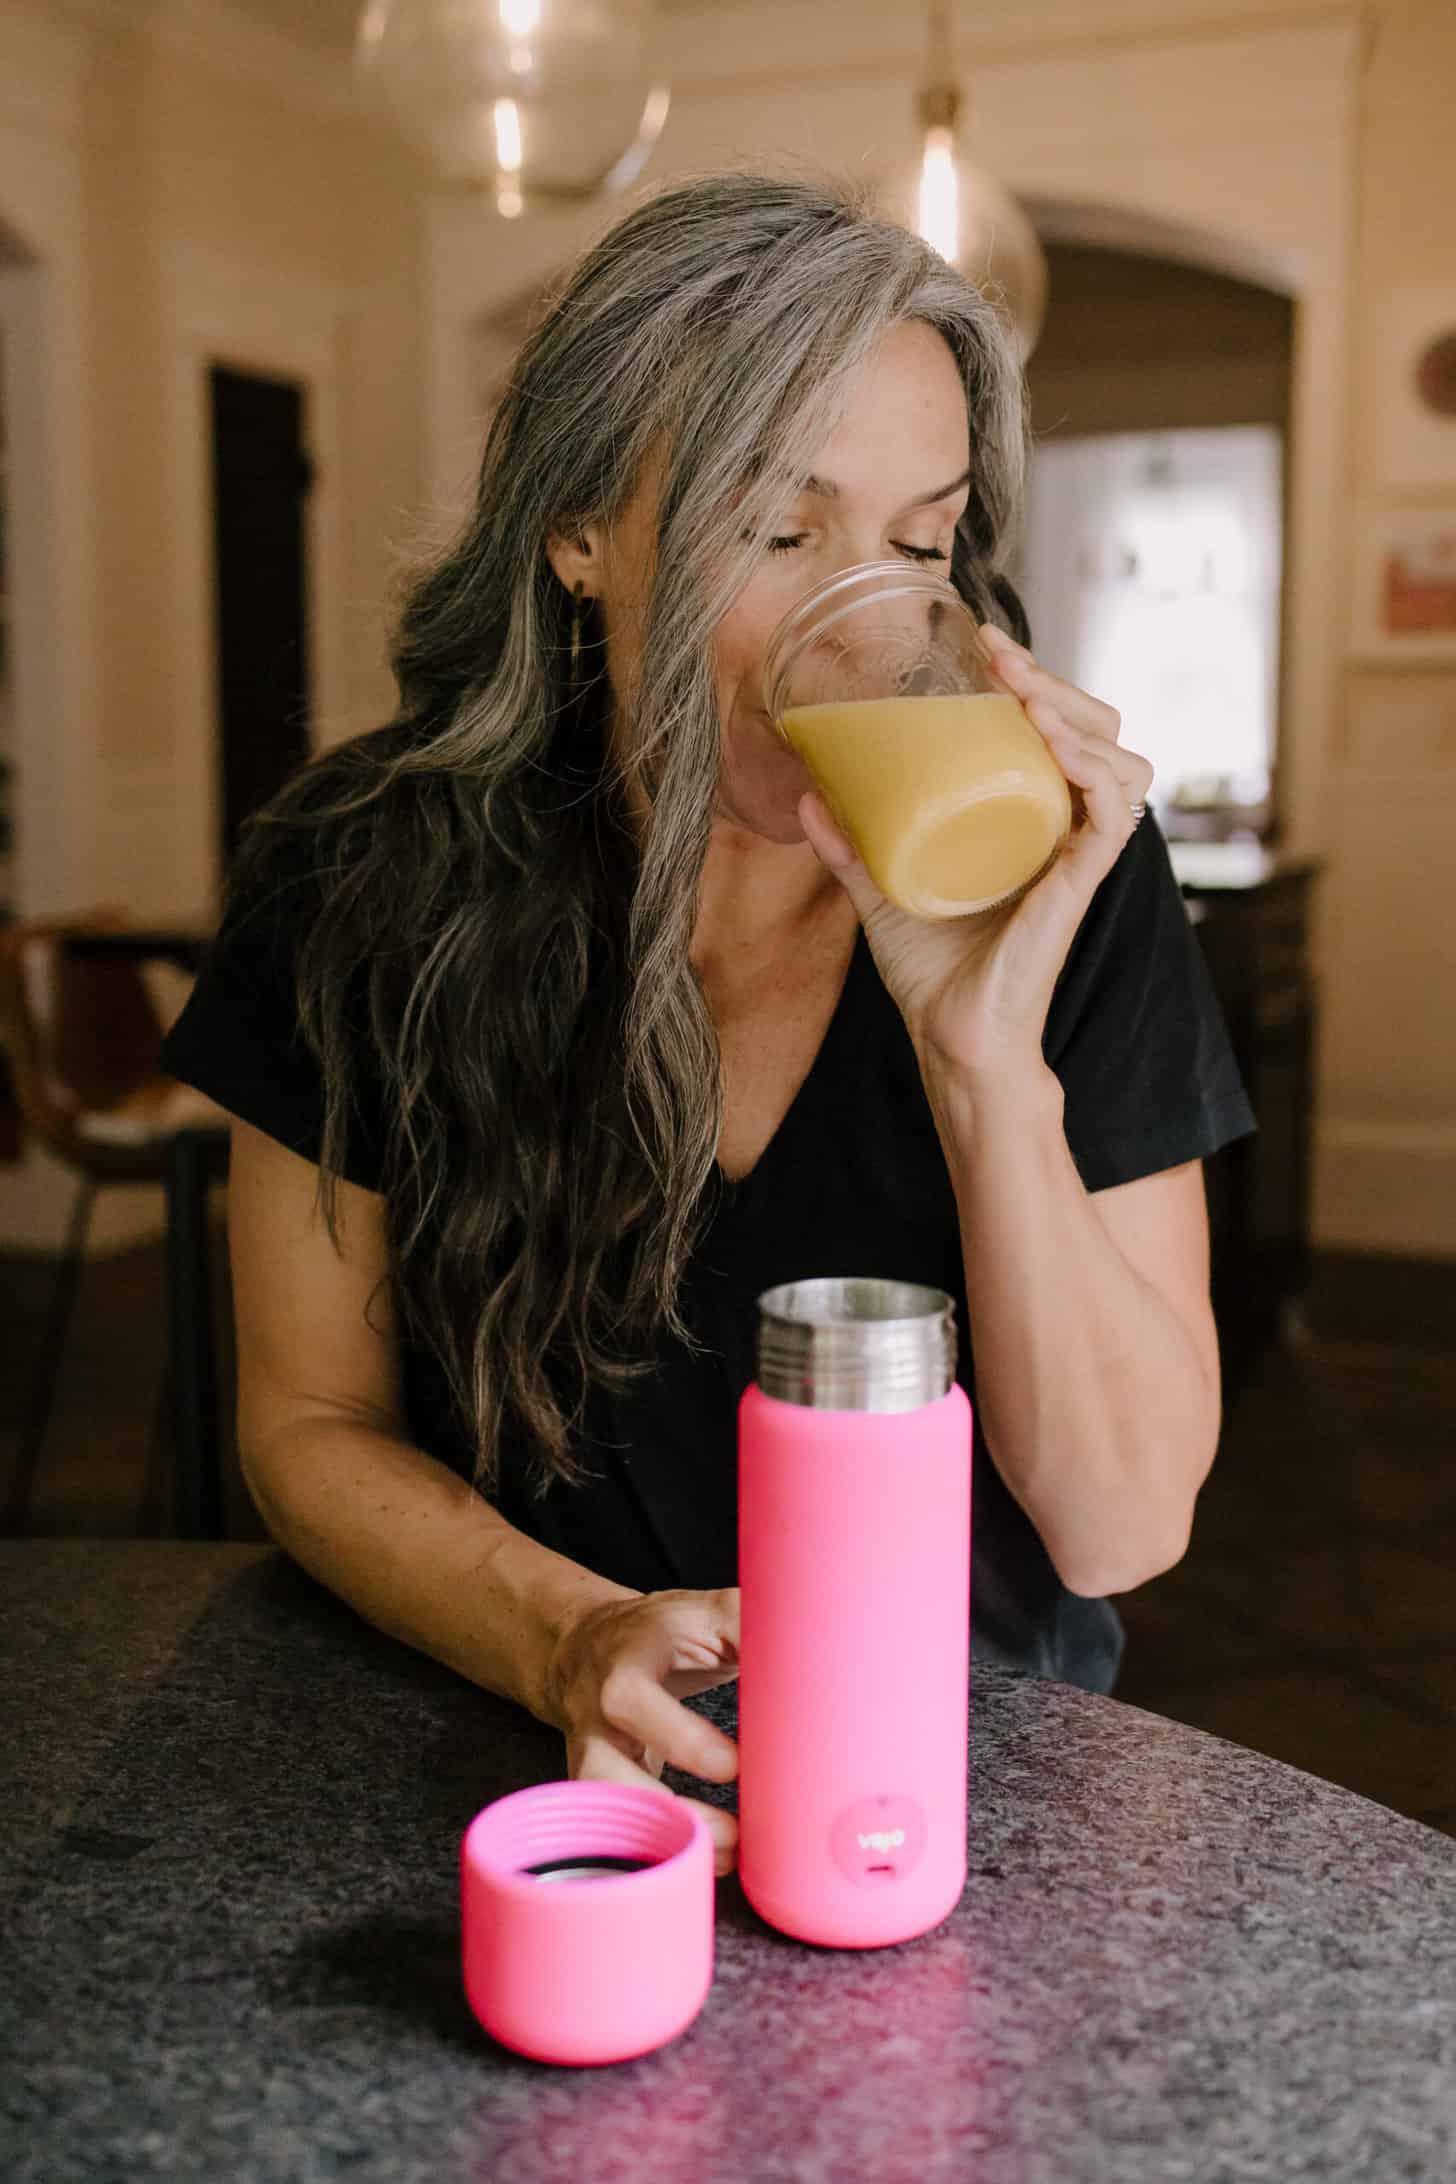 a hot pink portable blender sit on a table in front of a woman drinking a blended drink